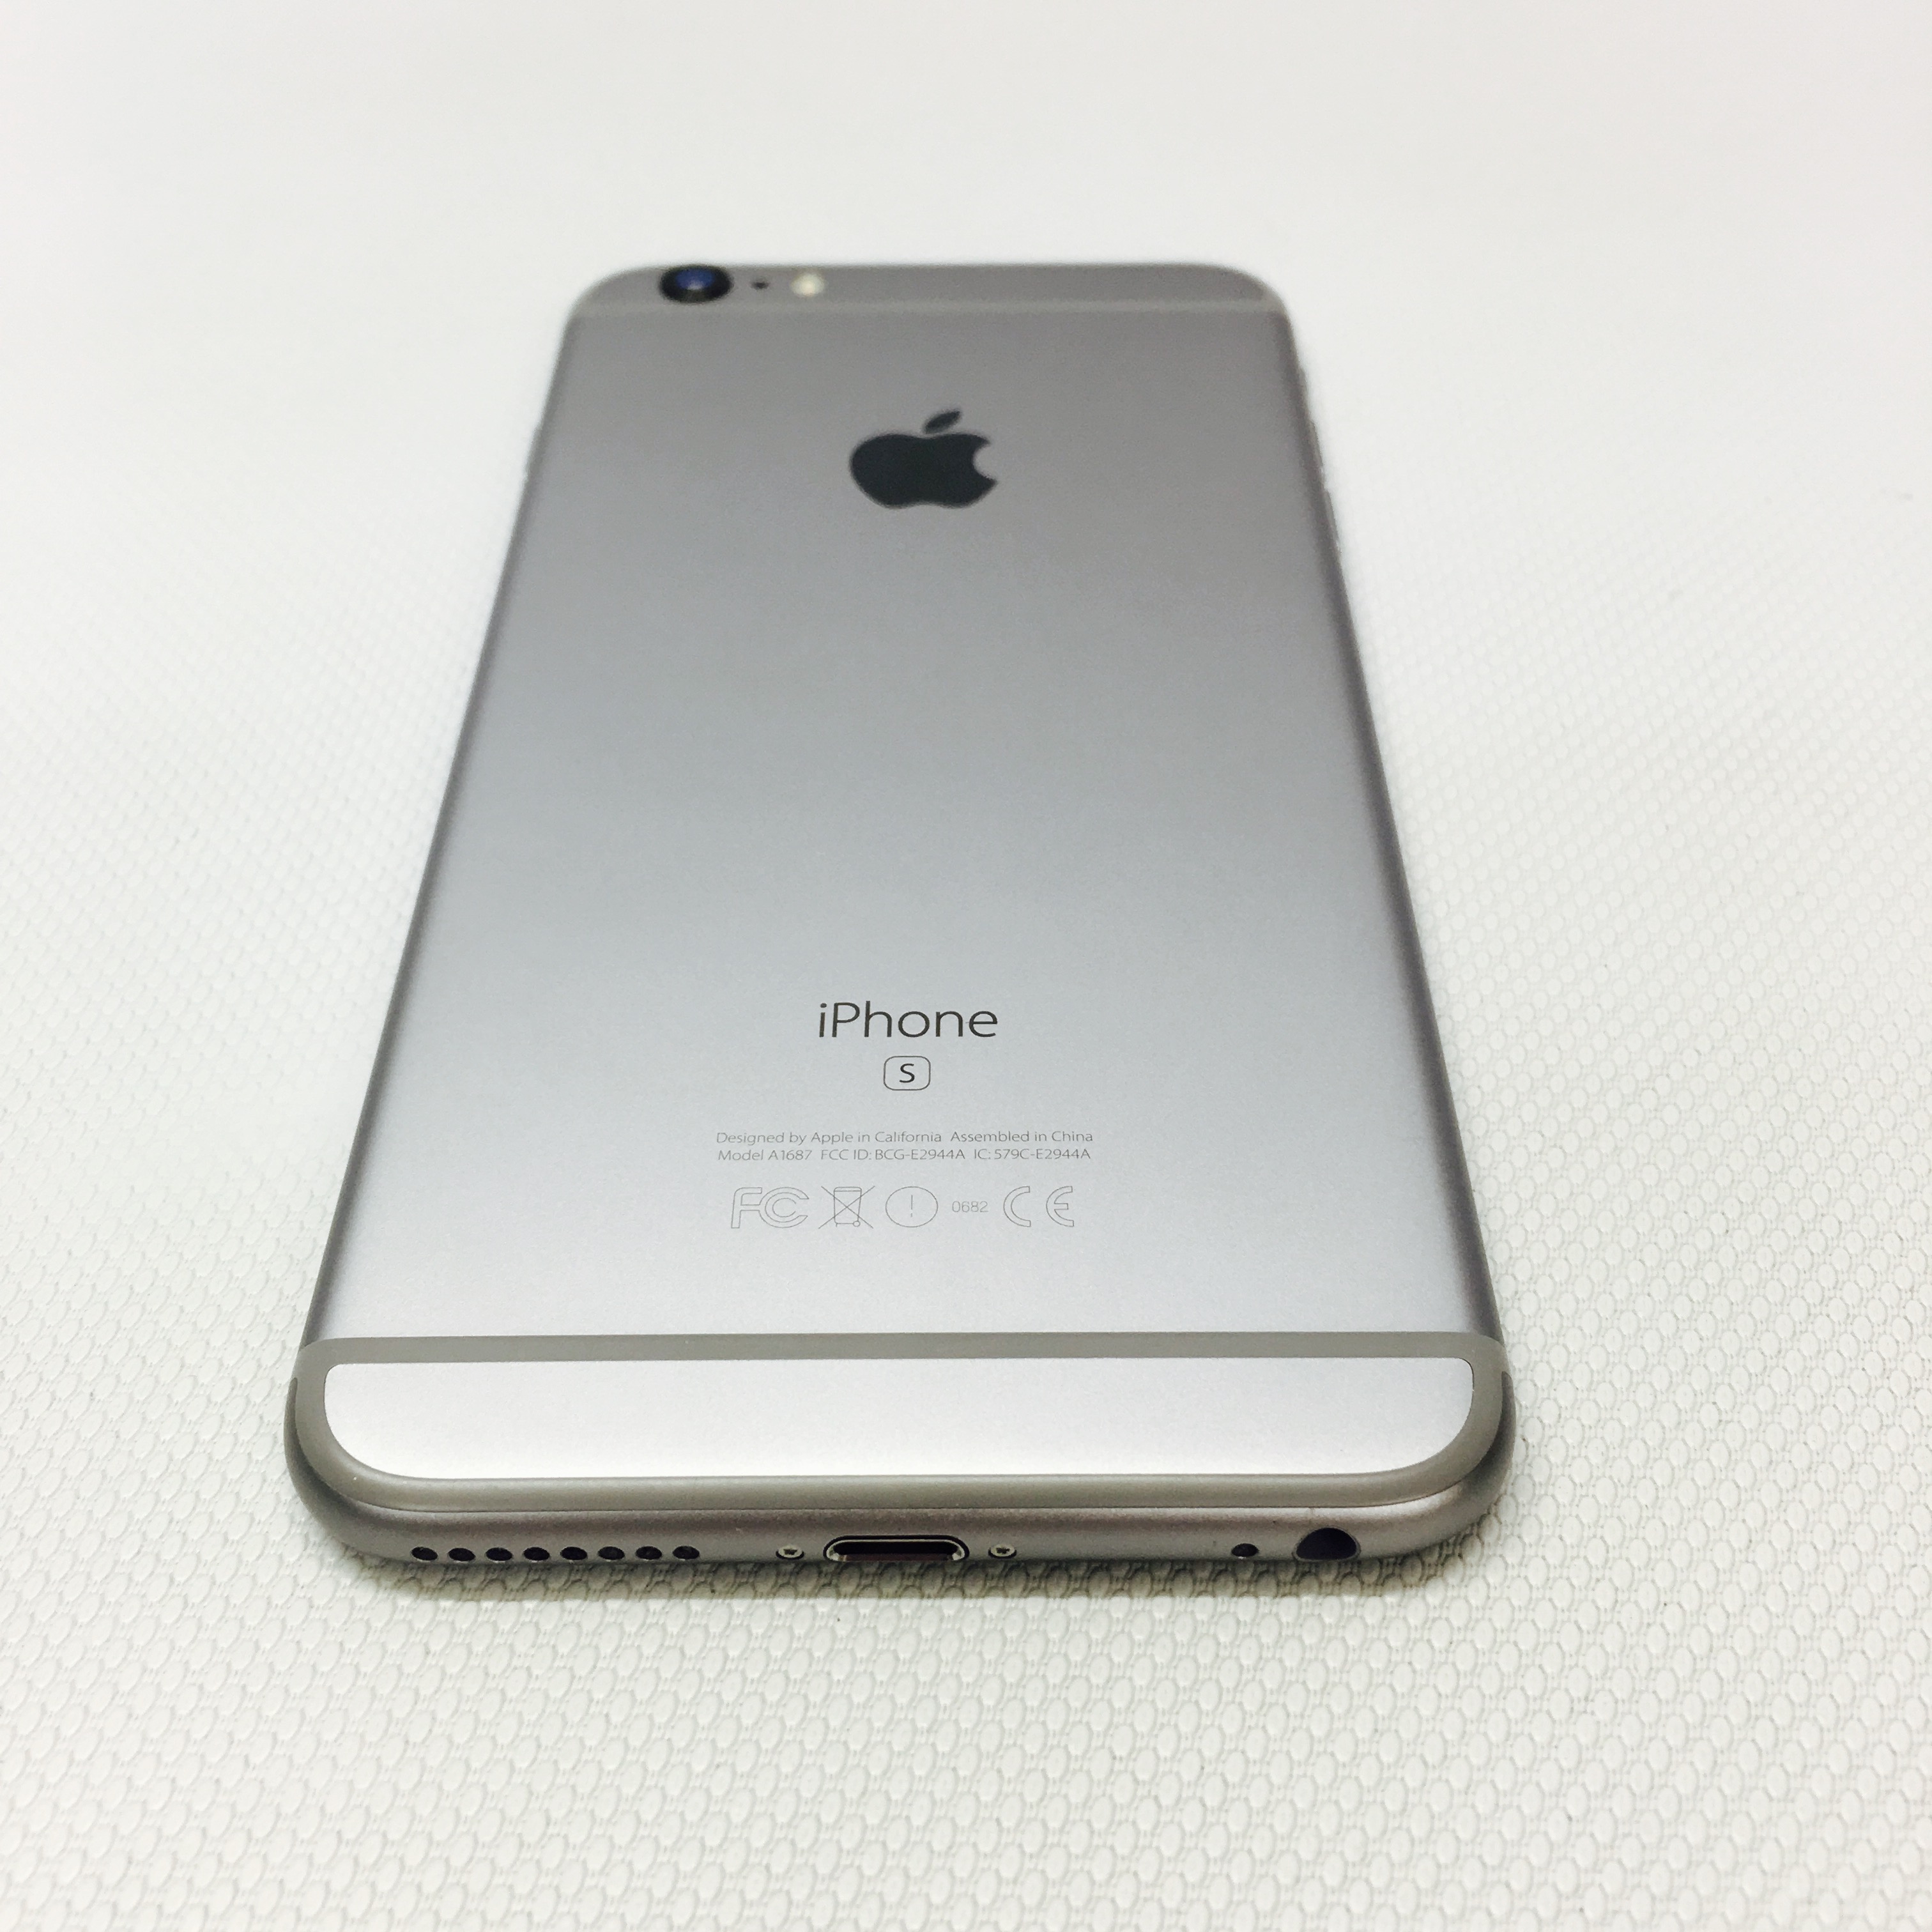 Fully Refurbished Iphone 6s Plus 64gb Space Gray Apple Warranty 2016 10 24 64gb Space Gray